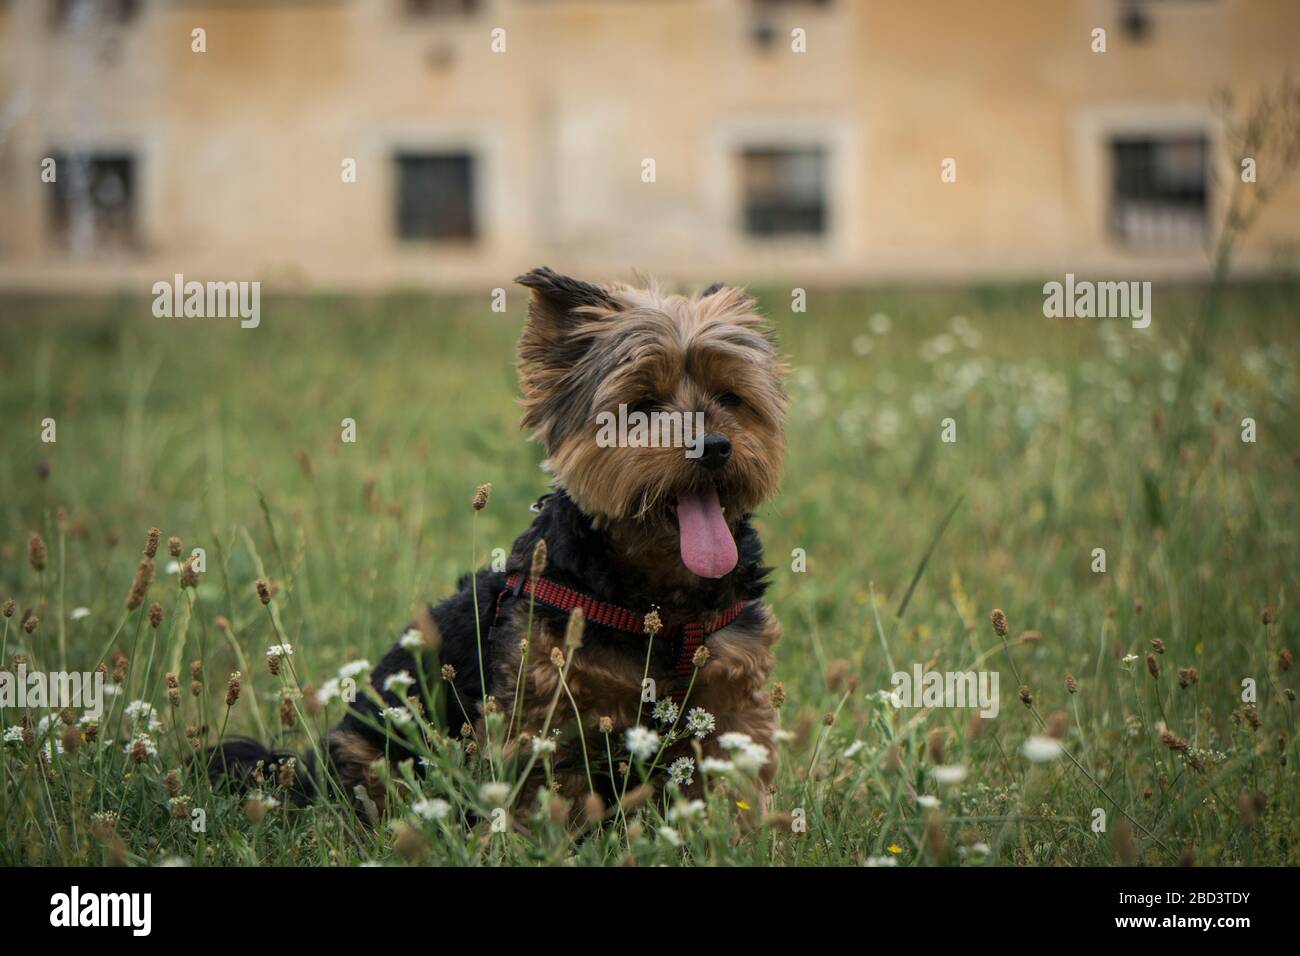 Ridiculously Photogenic Yorkshire Terrier Mia in the grass in Slovakia Europe Stock Photo